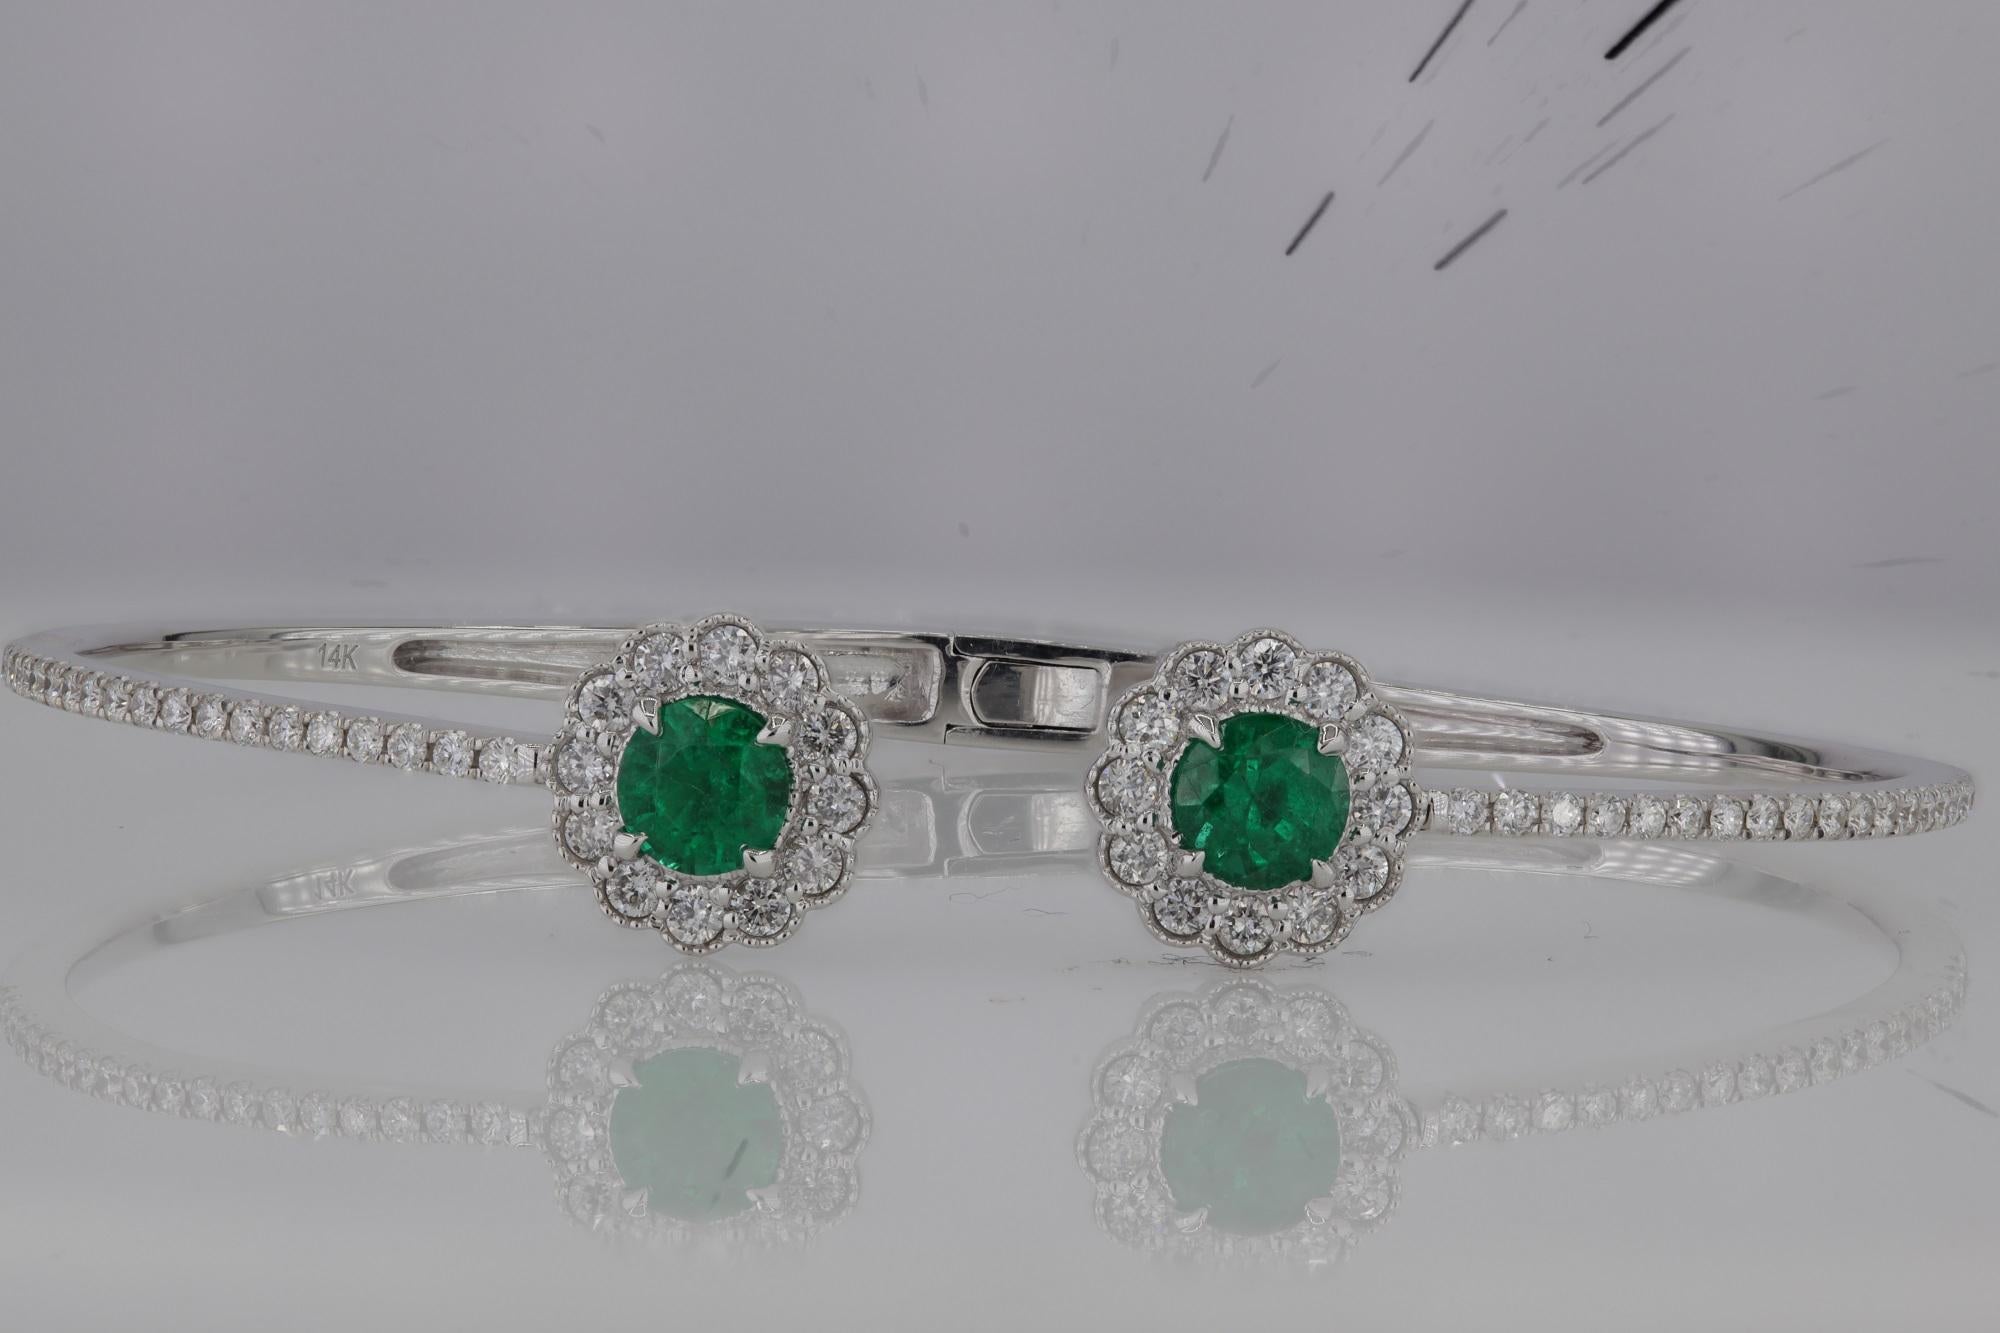 1.75 Carat Round Cut Emerald and Natural Diamond Flower Bangle in 14W ref188 For Sale 1